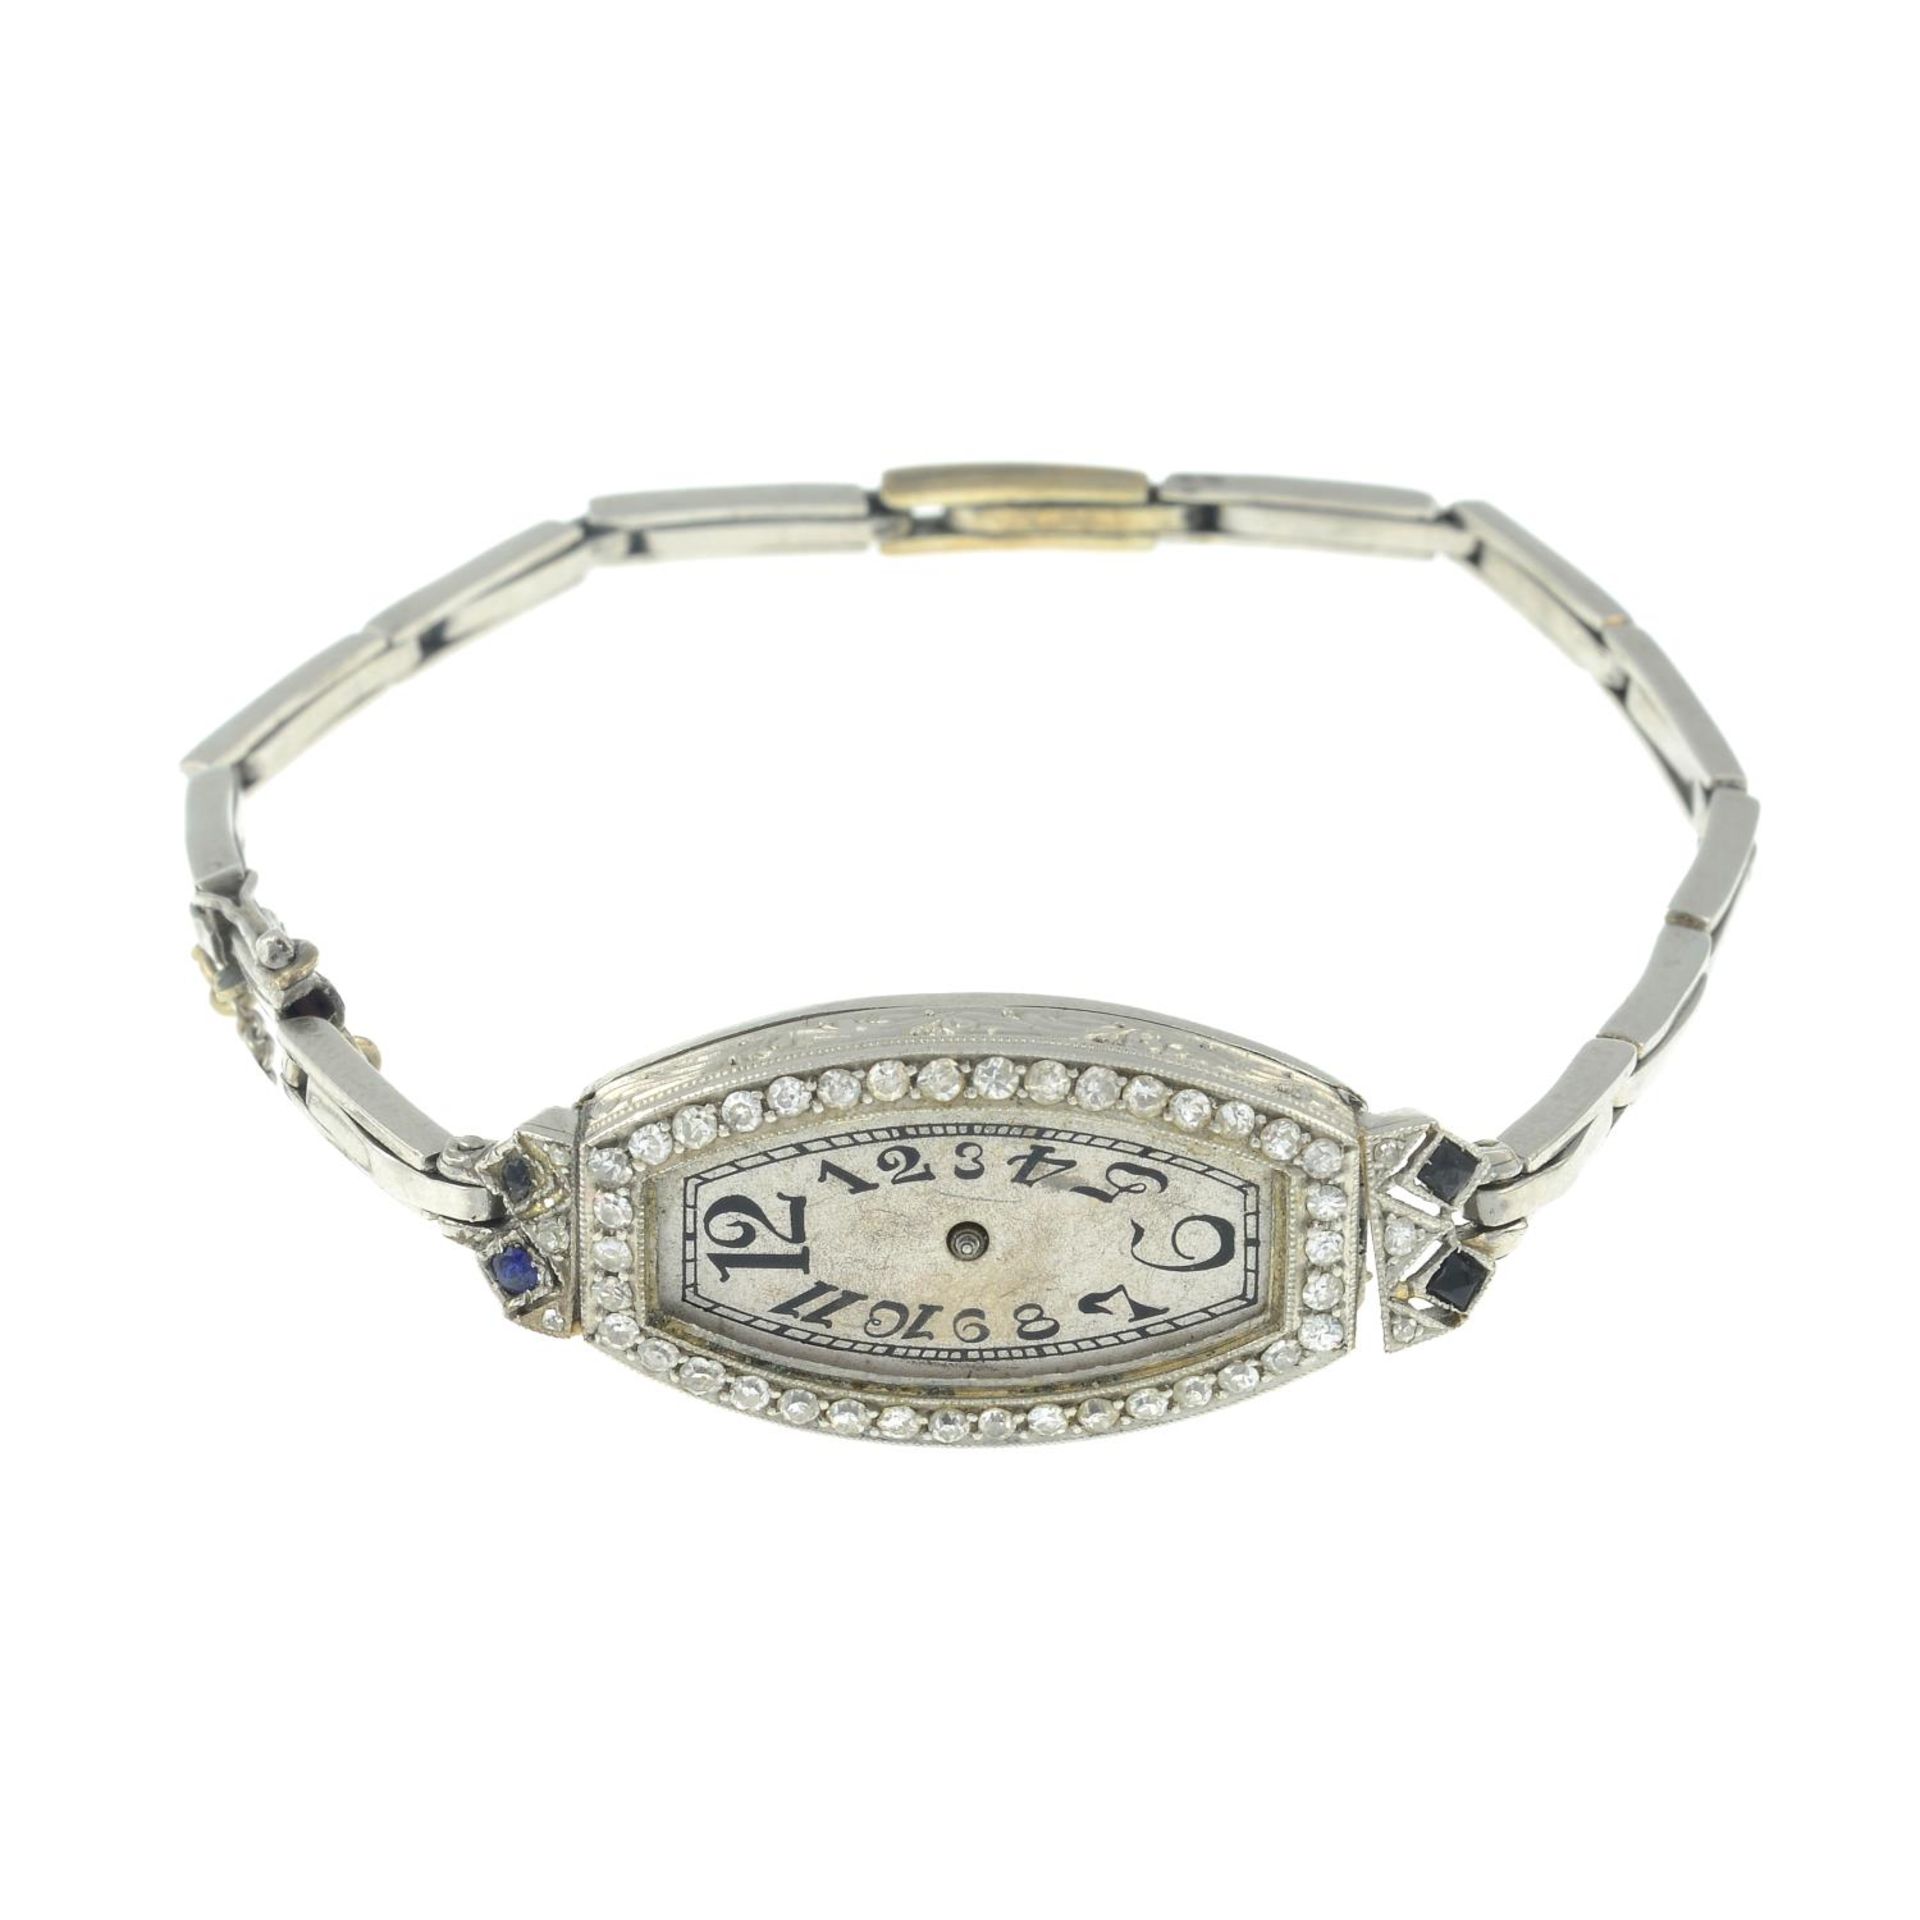 A lady's early 20th century platinum diamond cocktail watch.